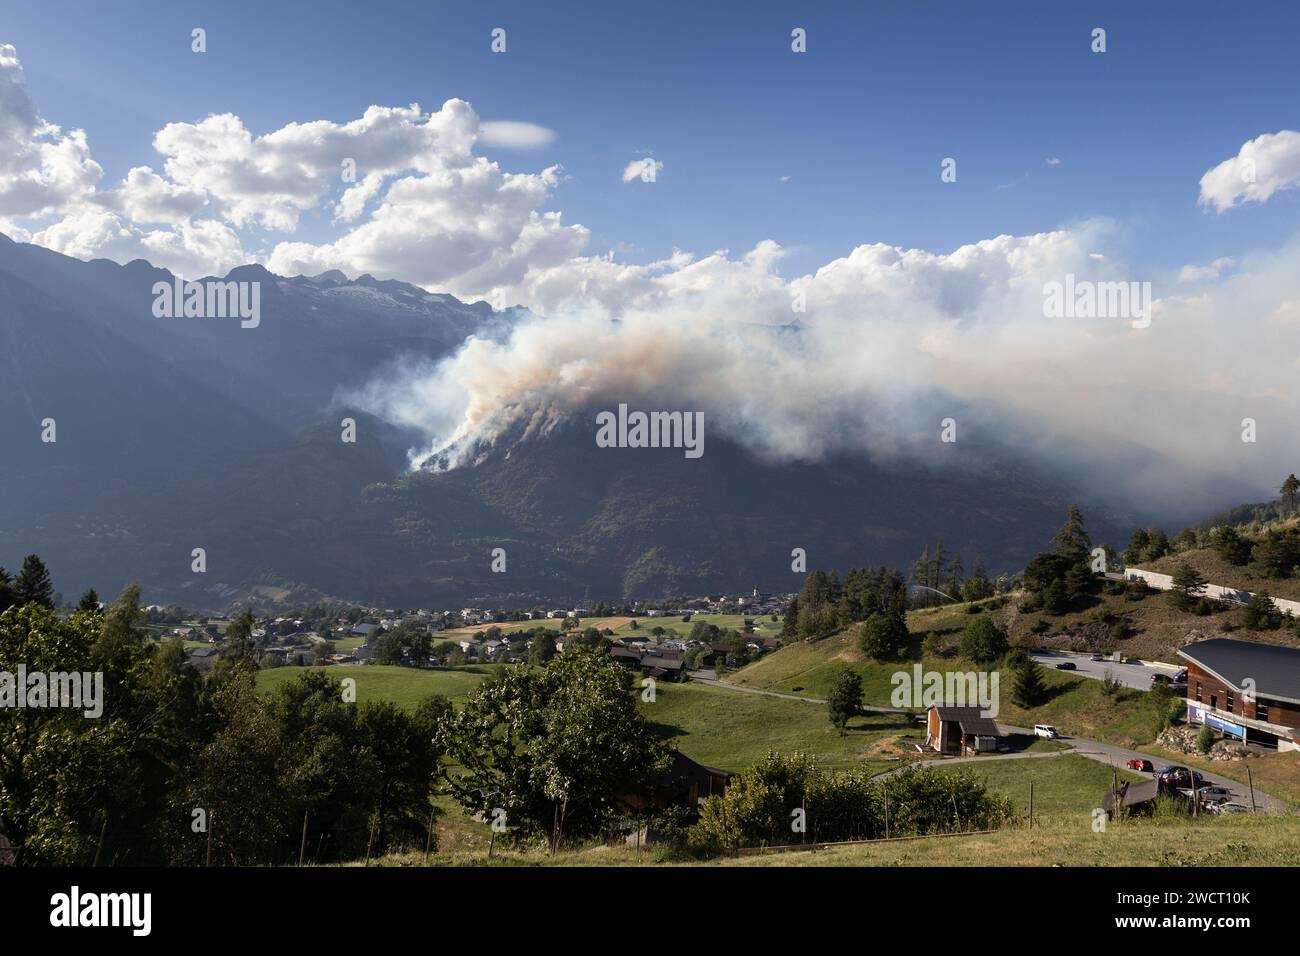 Forest fire engulfs the side of the Riederhorn moutain, near Brig in Switzerland with smoke filling the Rhone Valley. Real forest fire which occured i Stock Photo